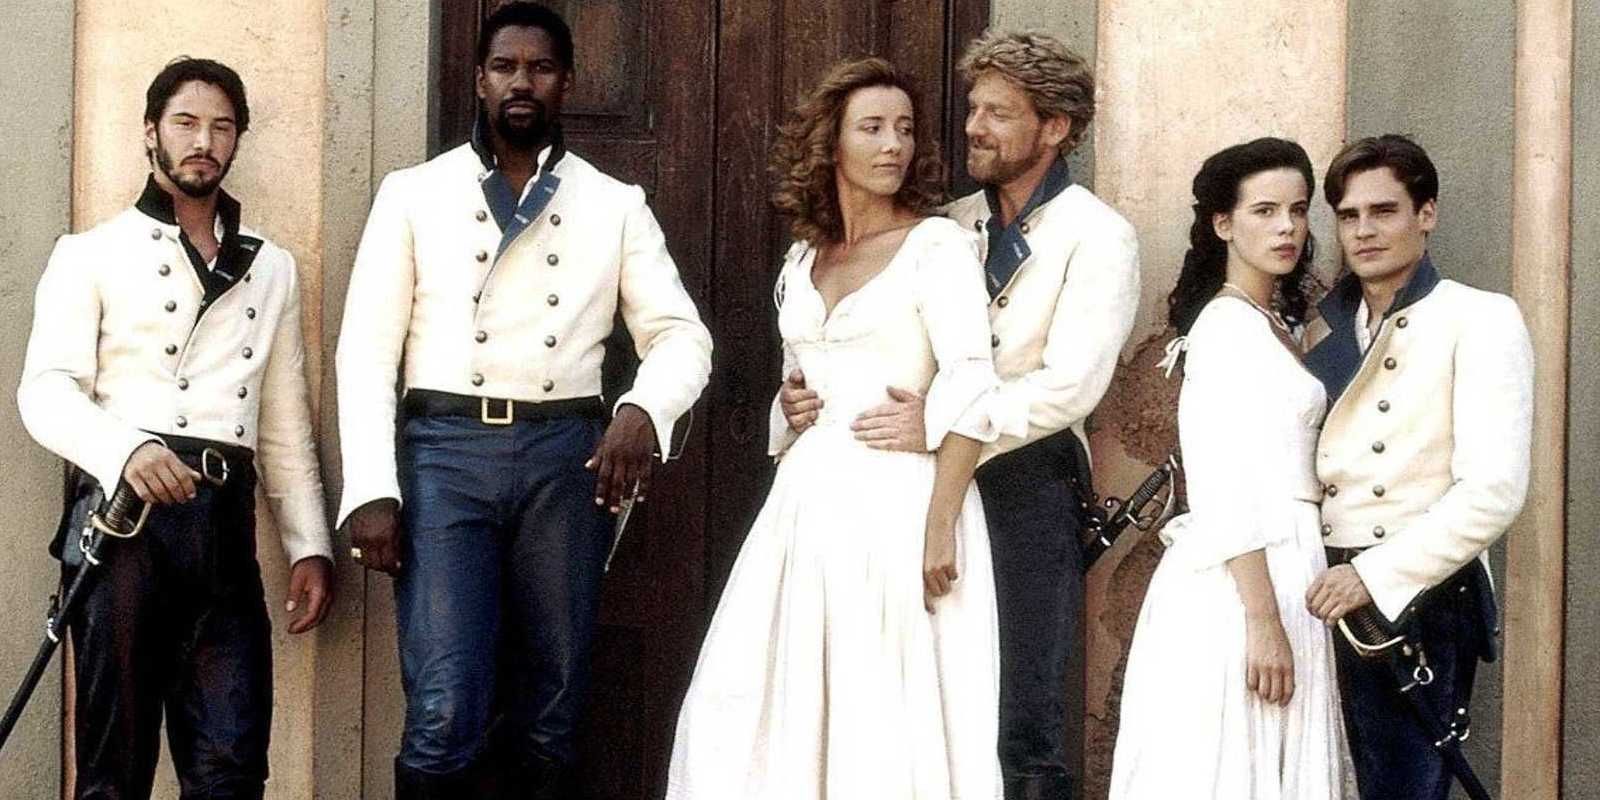 A group of people in white jackets in Much Ado About Nothing